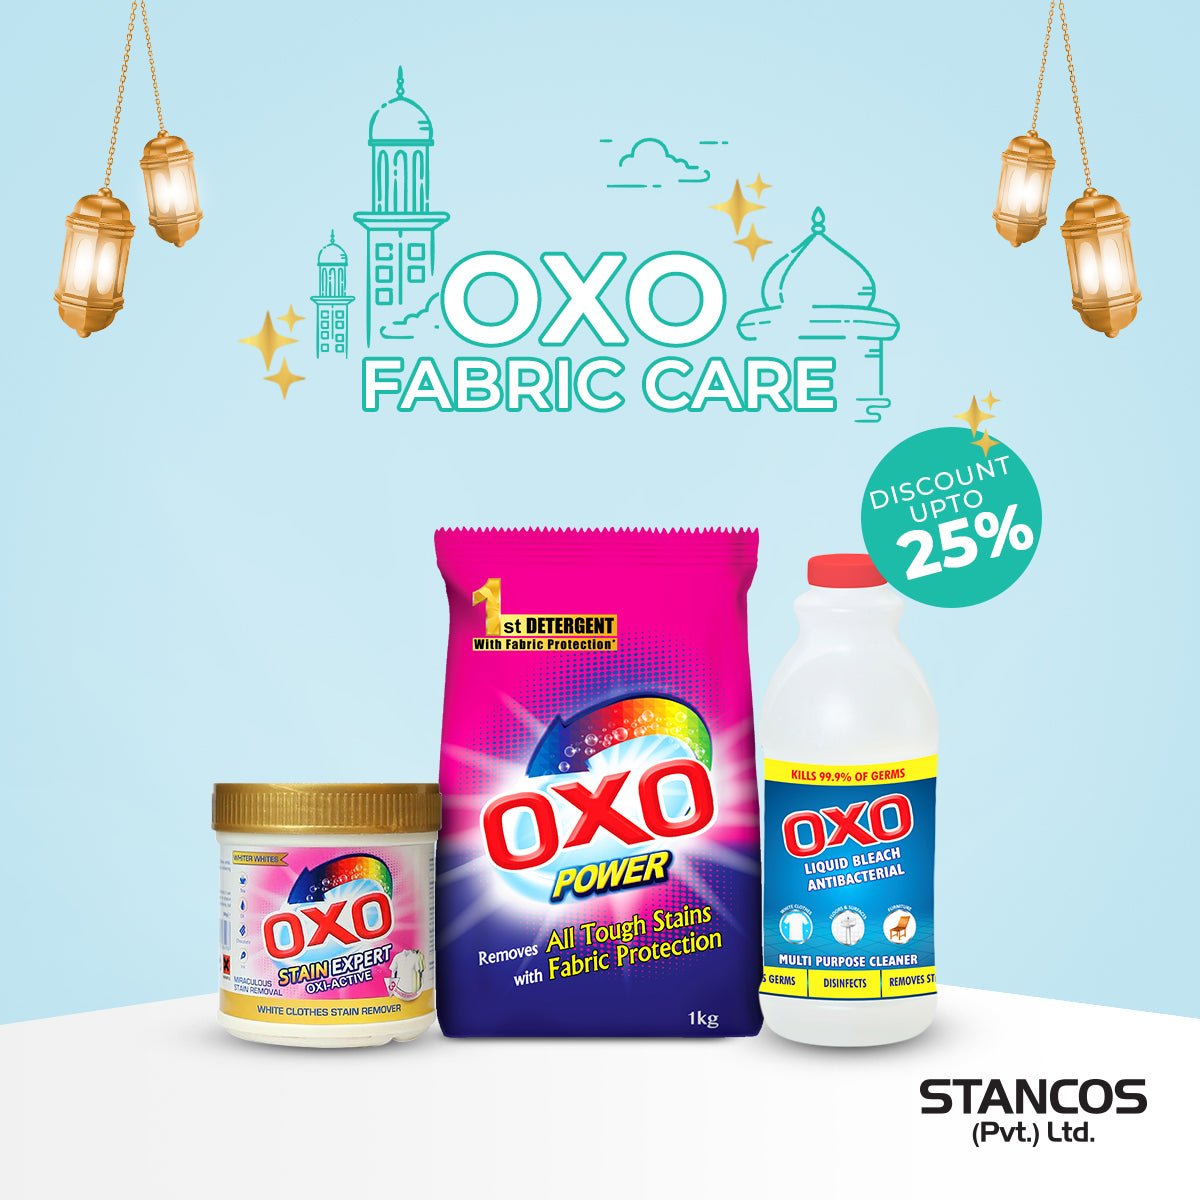 Best OXO Fabric Care Deal Online In Pakistan -